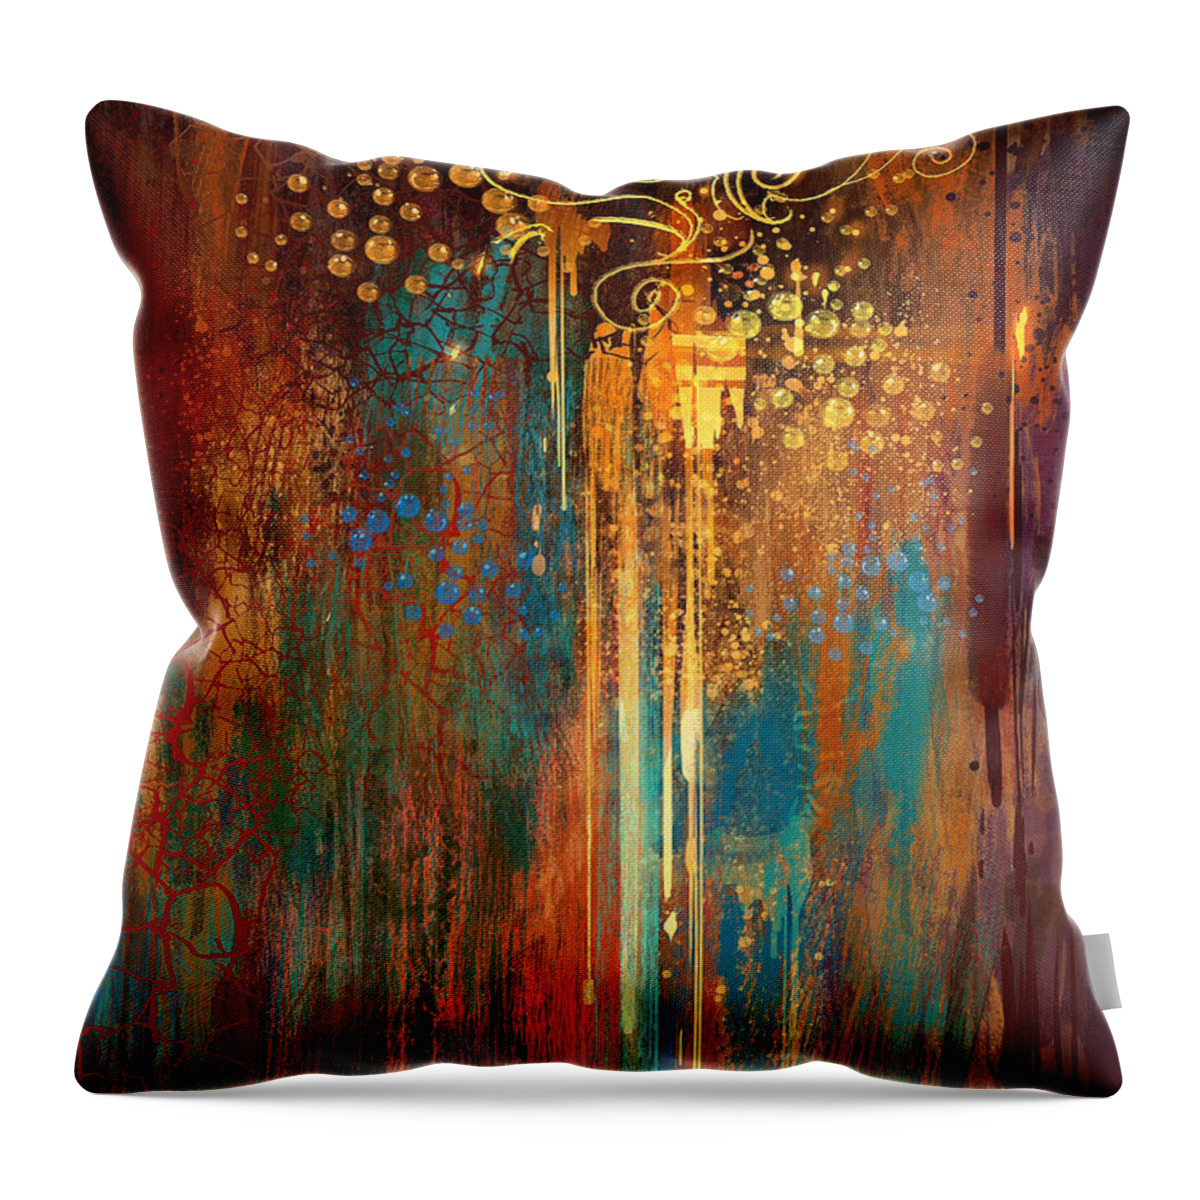 Art Throw Pillow featuring the painting Growth by Tithi Luadthong